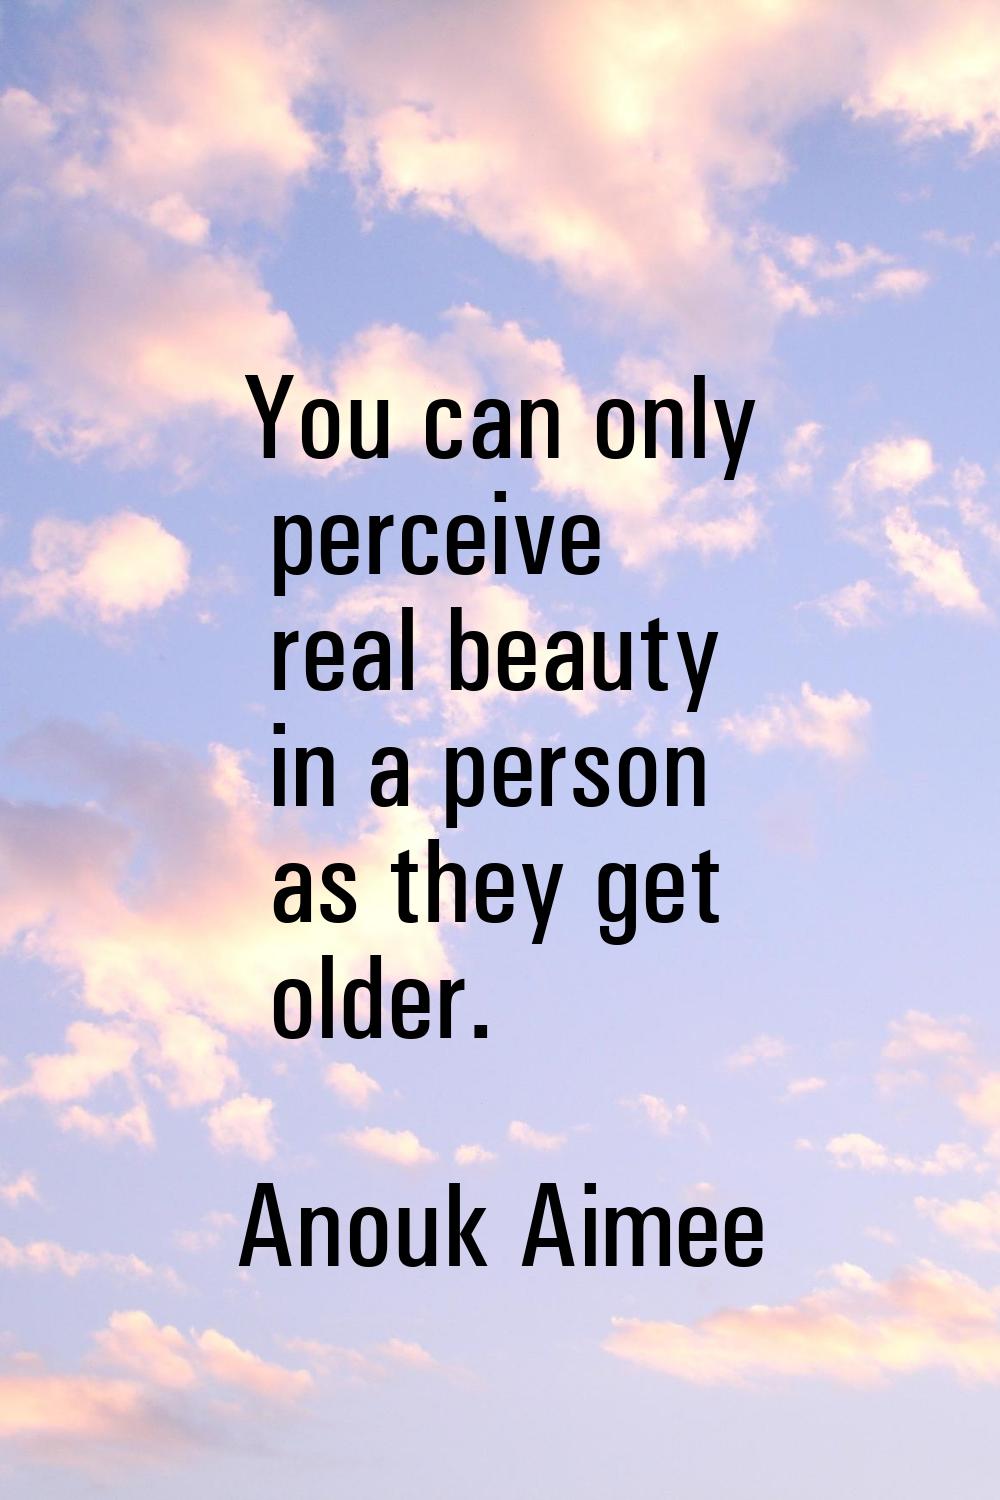 You can only perceive real beauty in a person as they get older.